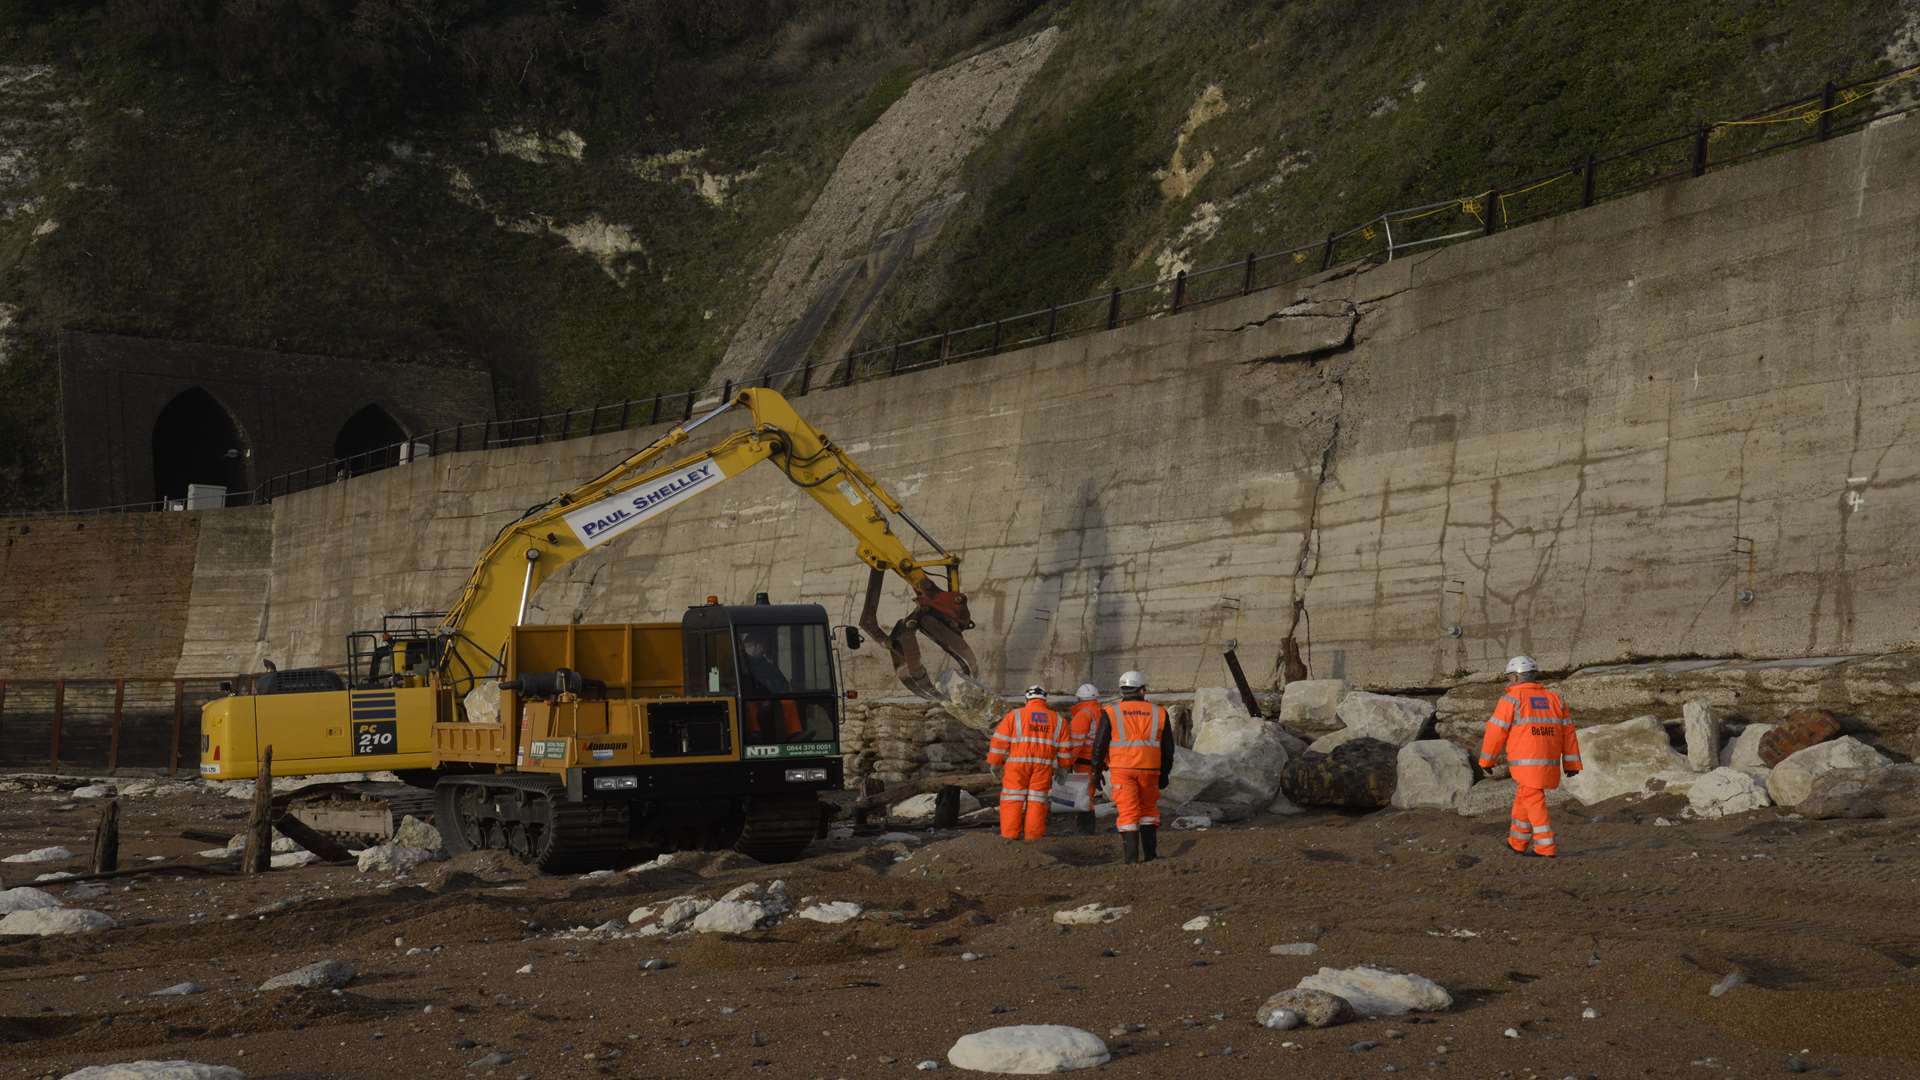 The damaged sea wall and railway embankment between Dover and Folkestone has caused severe disruptions for commuters